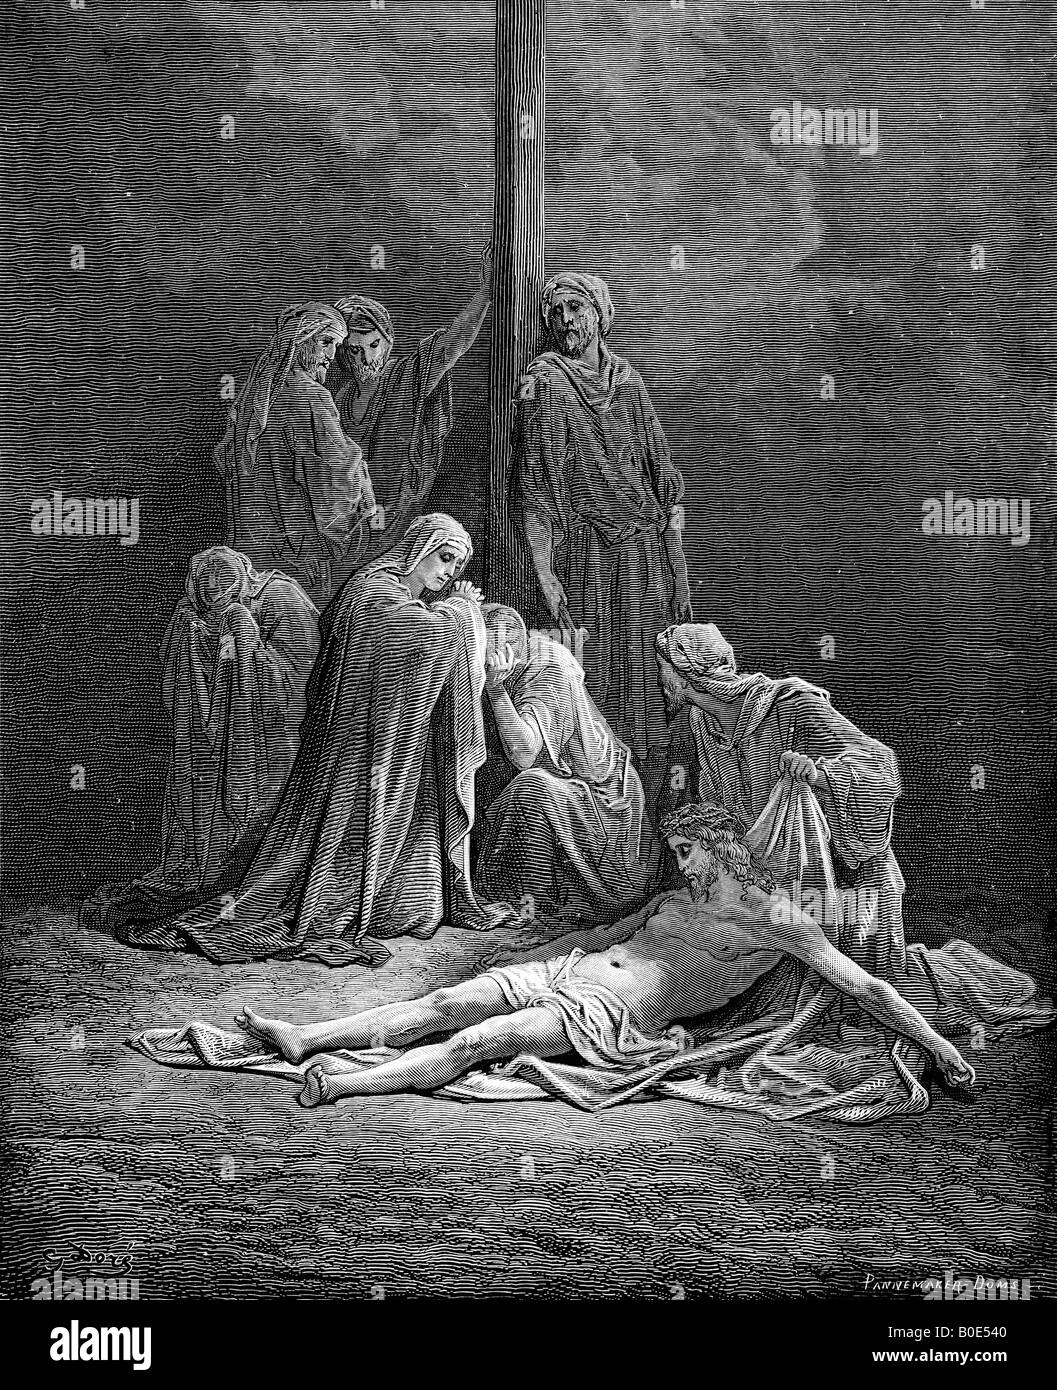 Engraving of Gustave Dore illustration of the Dead Christ Stock Photo